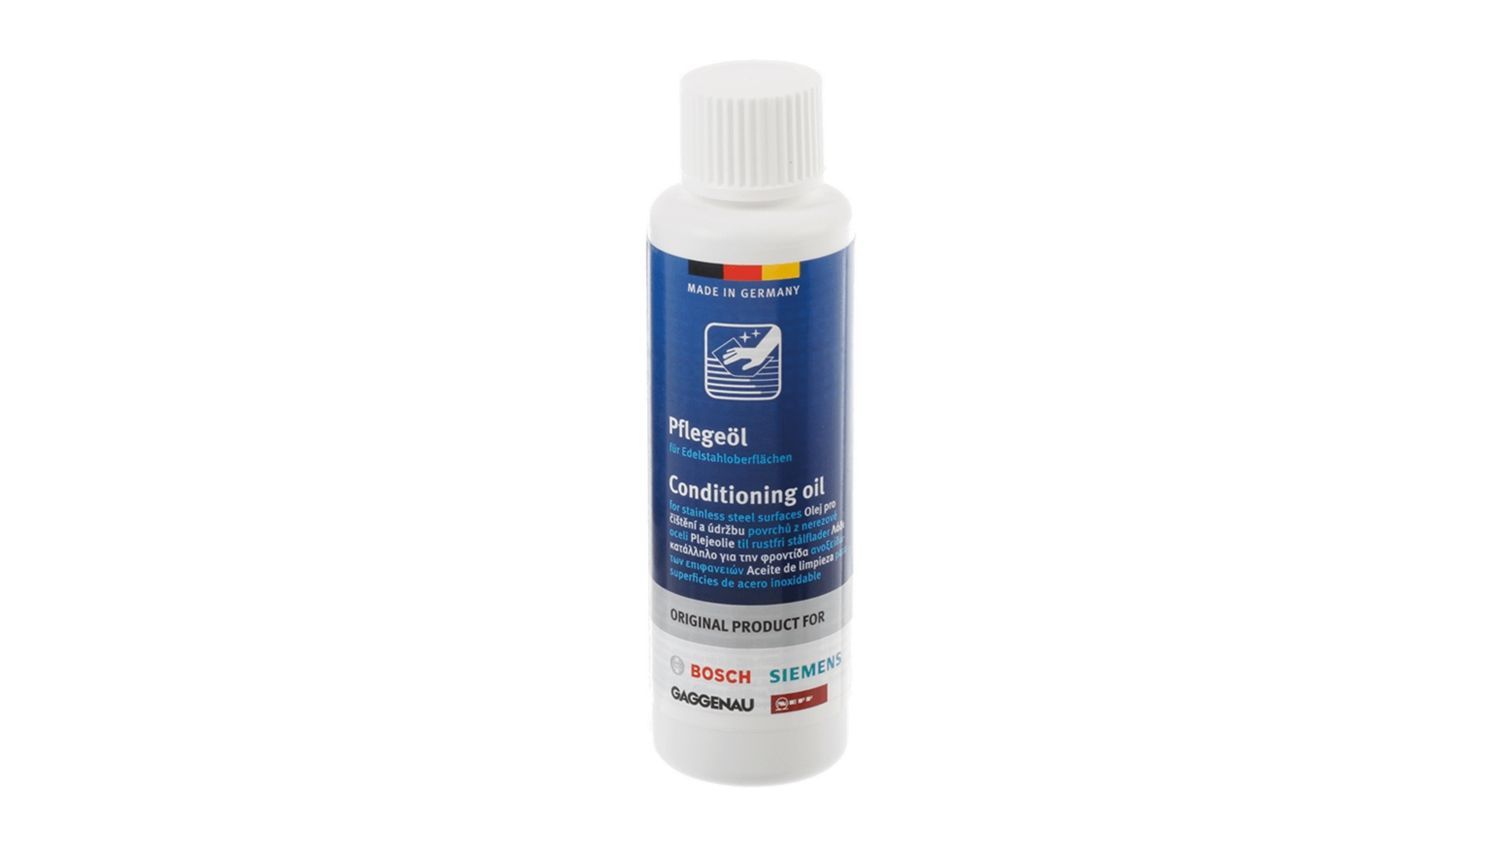 Cleaning Agent (Oil) for Bosch Siemens Stainless Steel Surfaces - 00311945 BSH - Bosch / Siemens